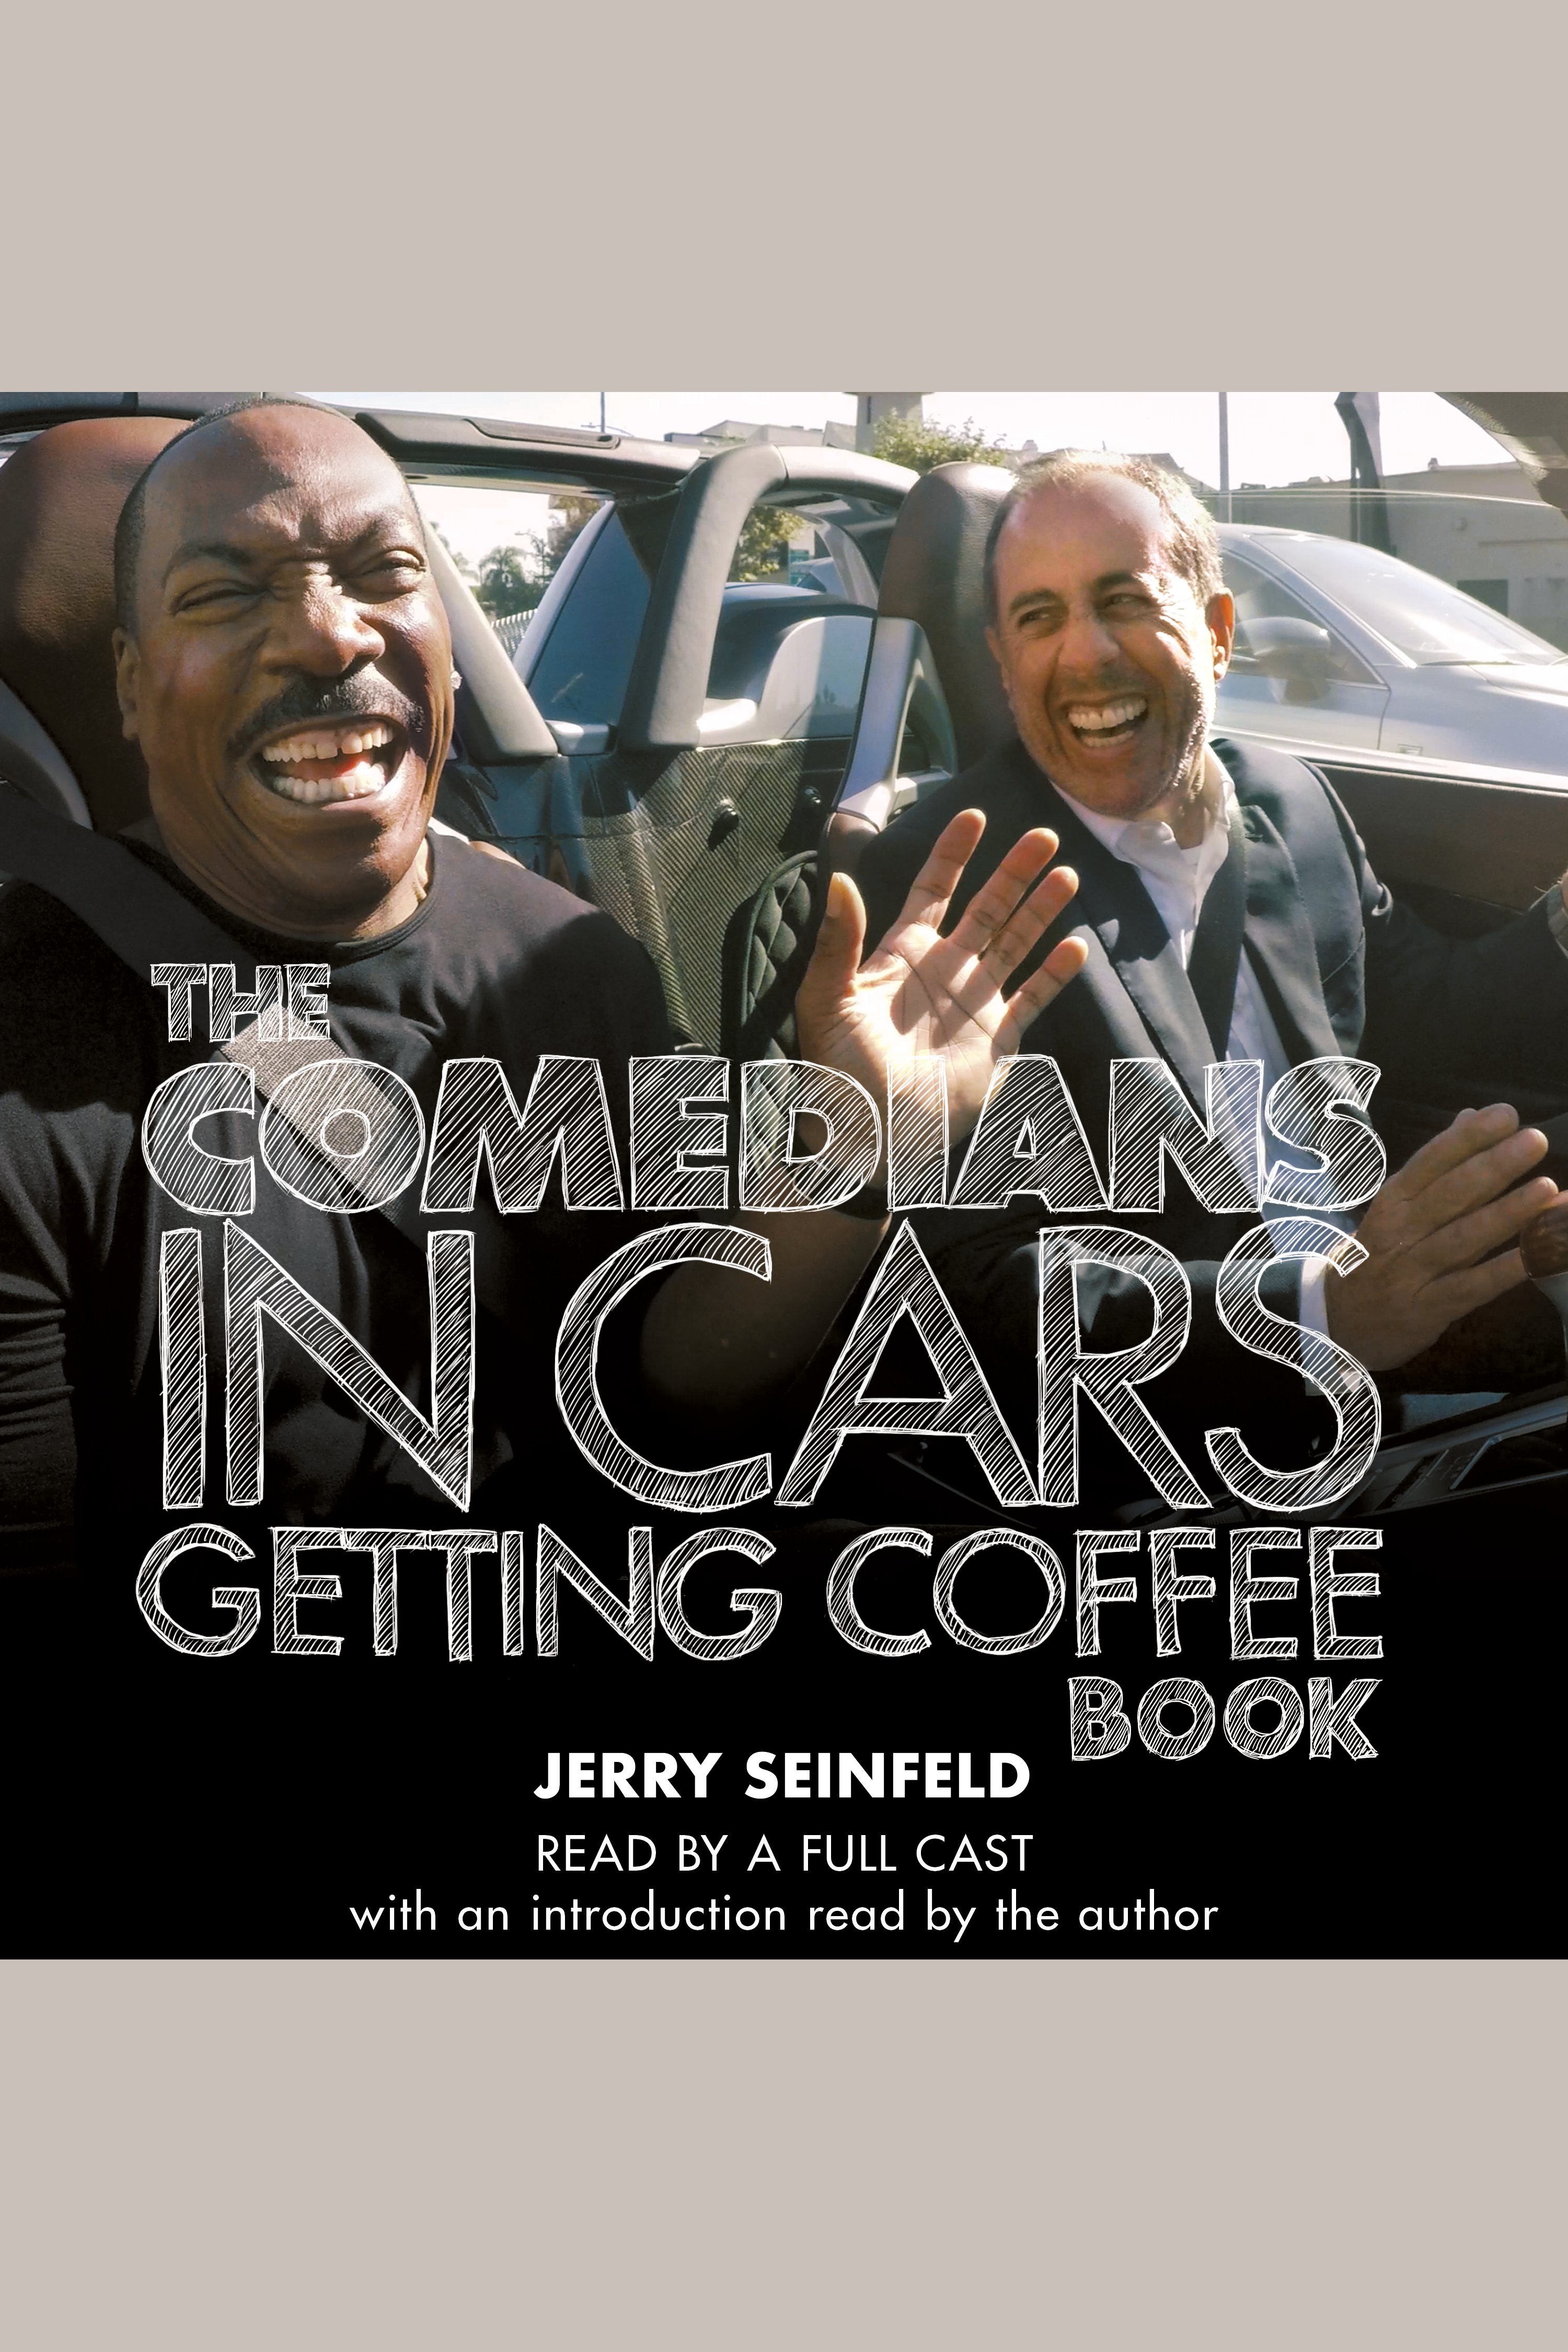 The Comedians in Cars Getting Coffee Book cover image